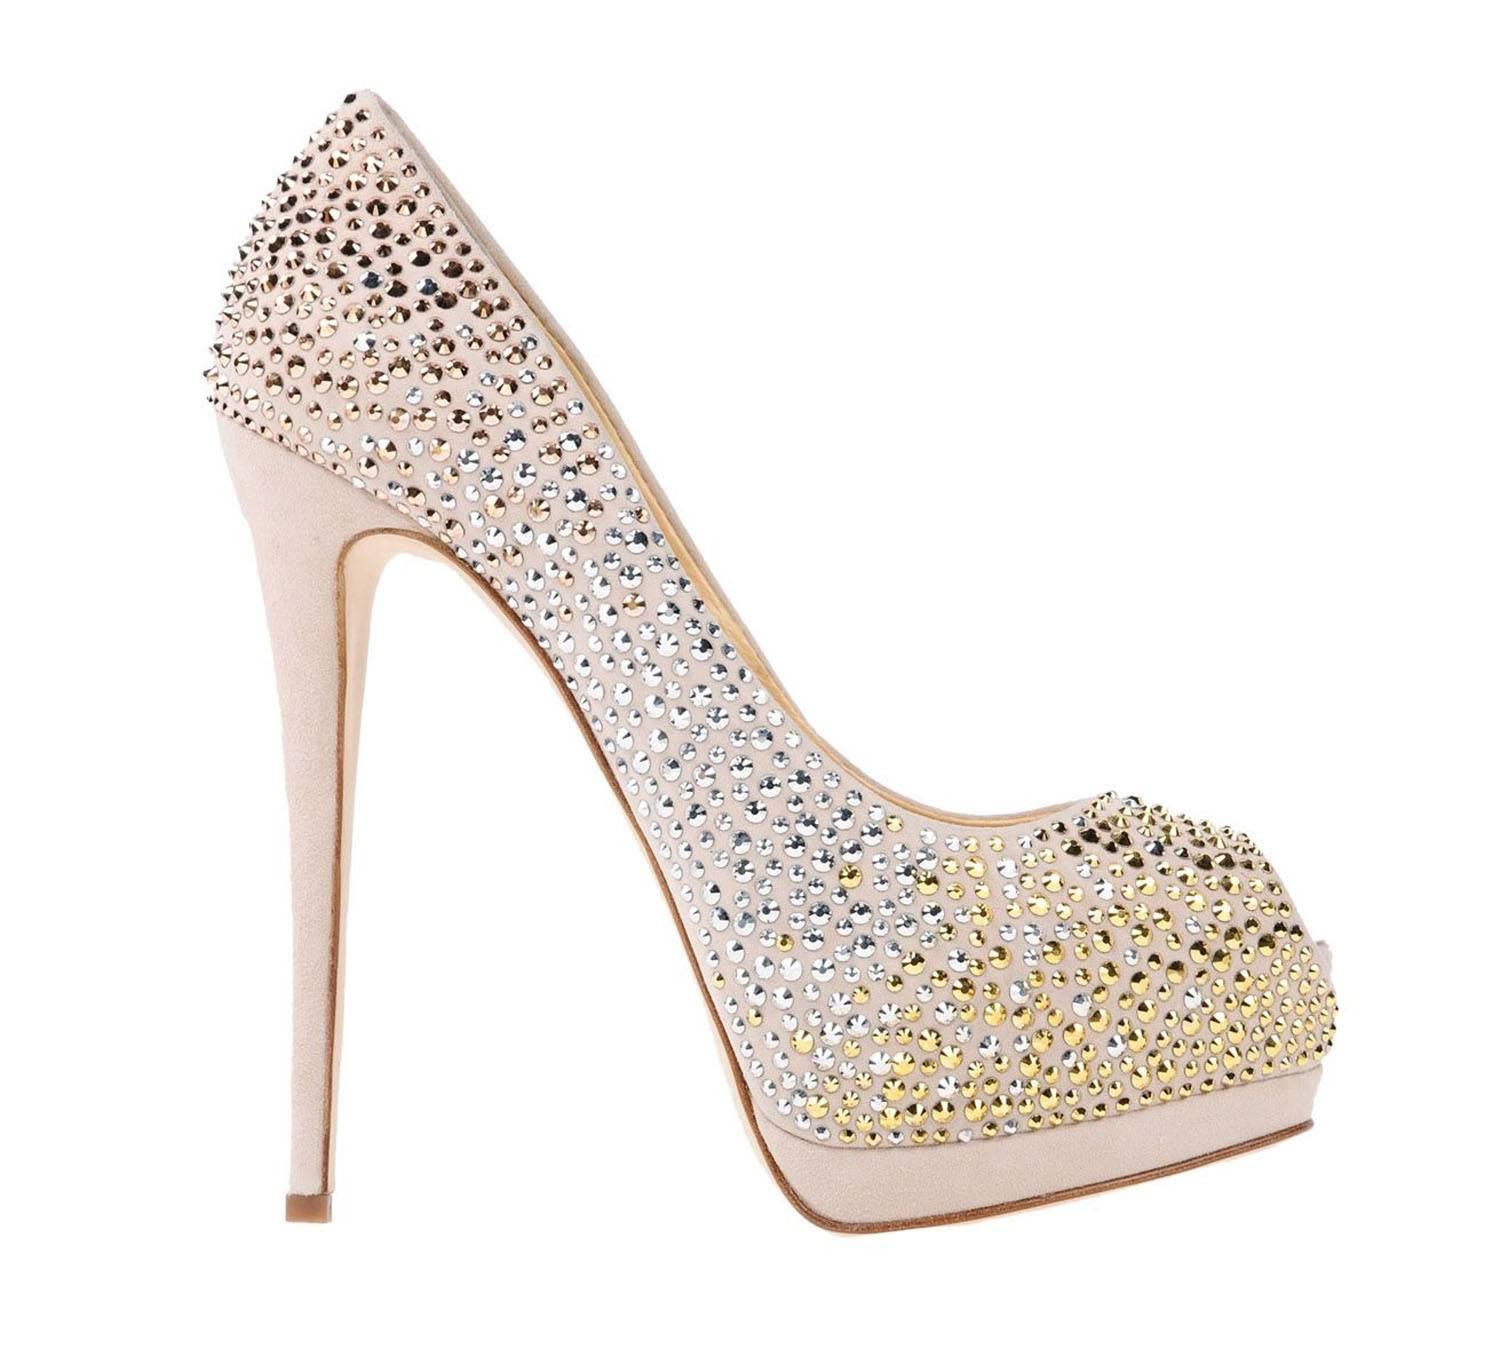 New Giuseppe Zanotti *Sharon* Nude Crystal Beaded Double Platform Heels Pumps
Designer size available - 38 and 38.5
Gold and Silver-tone Crystals over the Nude Color Suede
Heel height - 5.5 inches, Double Platform total - 1.25 inches.
Leather Sole